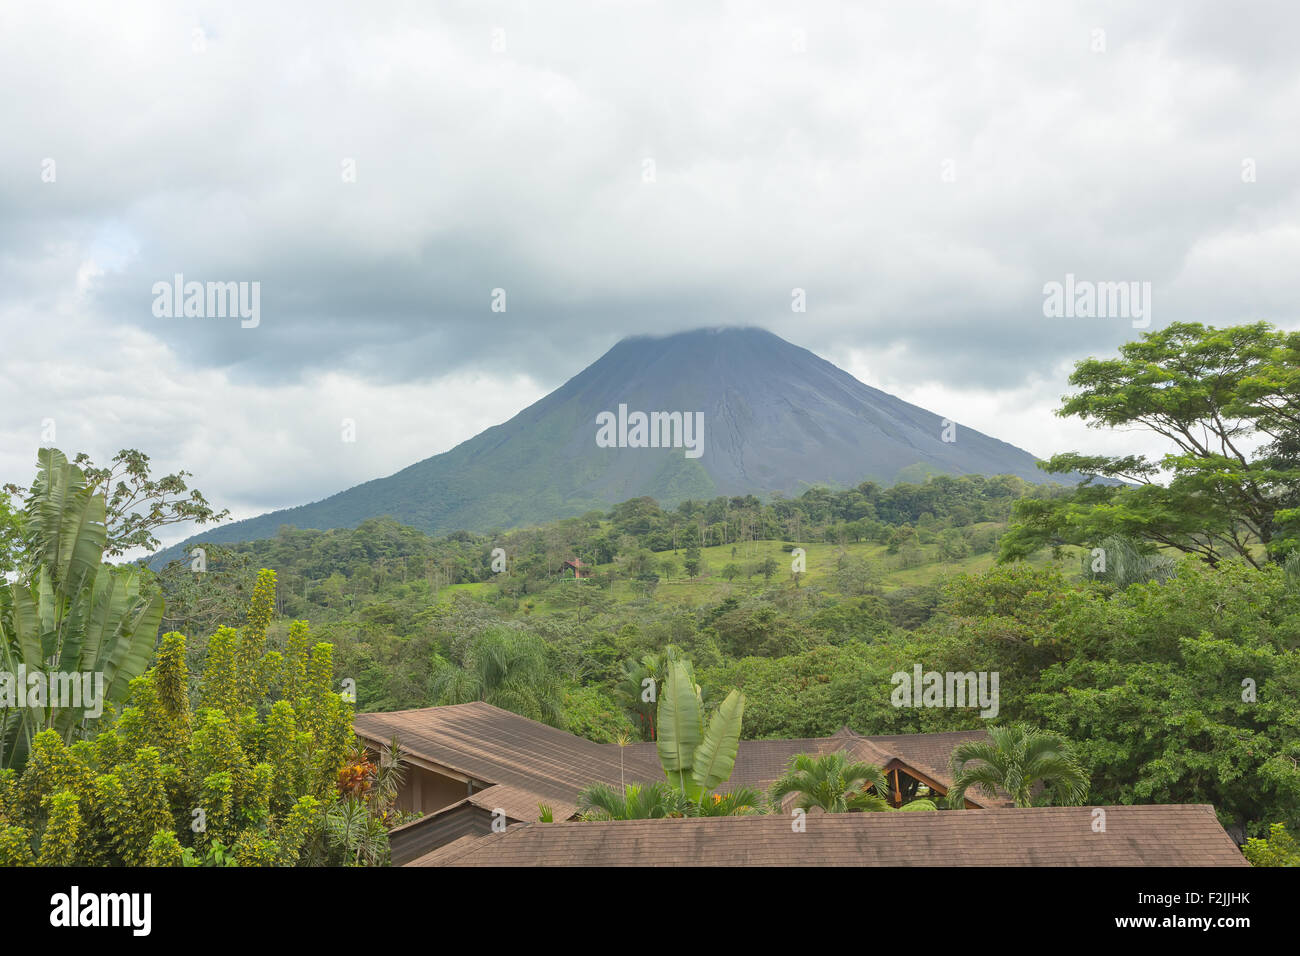 View of the Arenal Volcano from observation point, Costa Rica Stock Photo